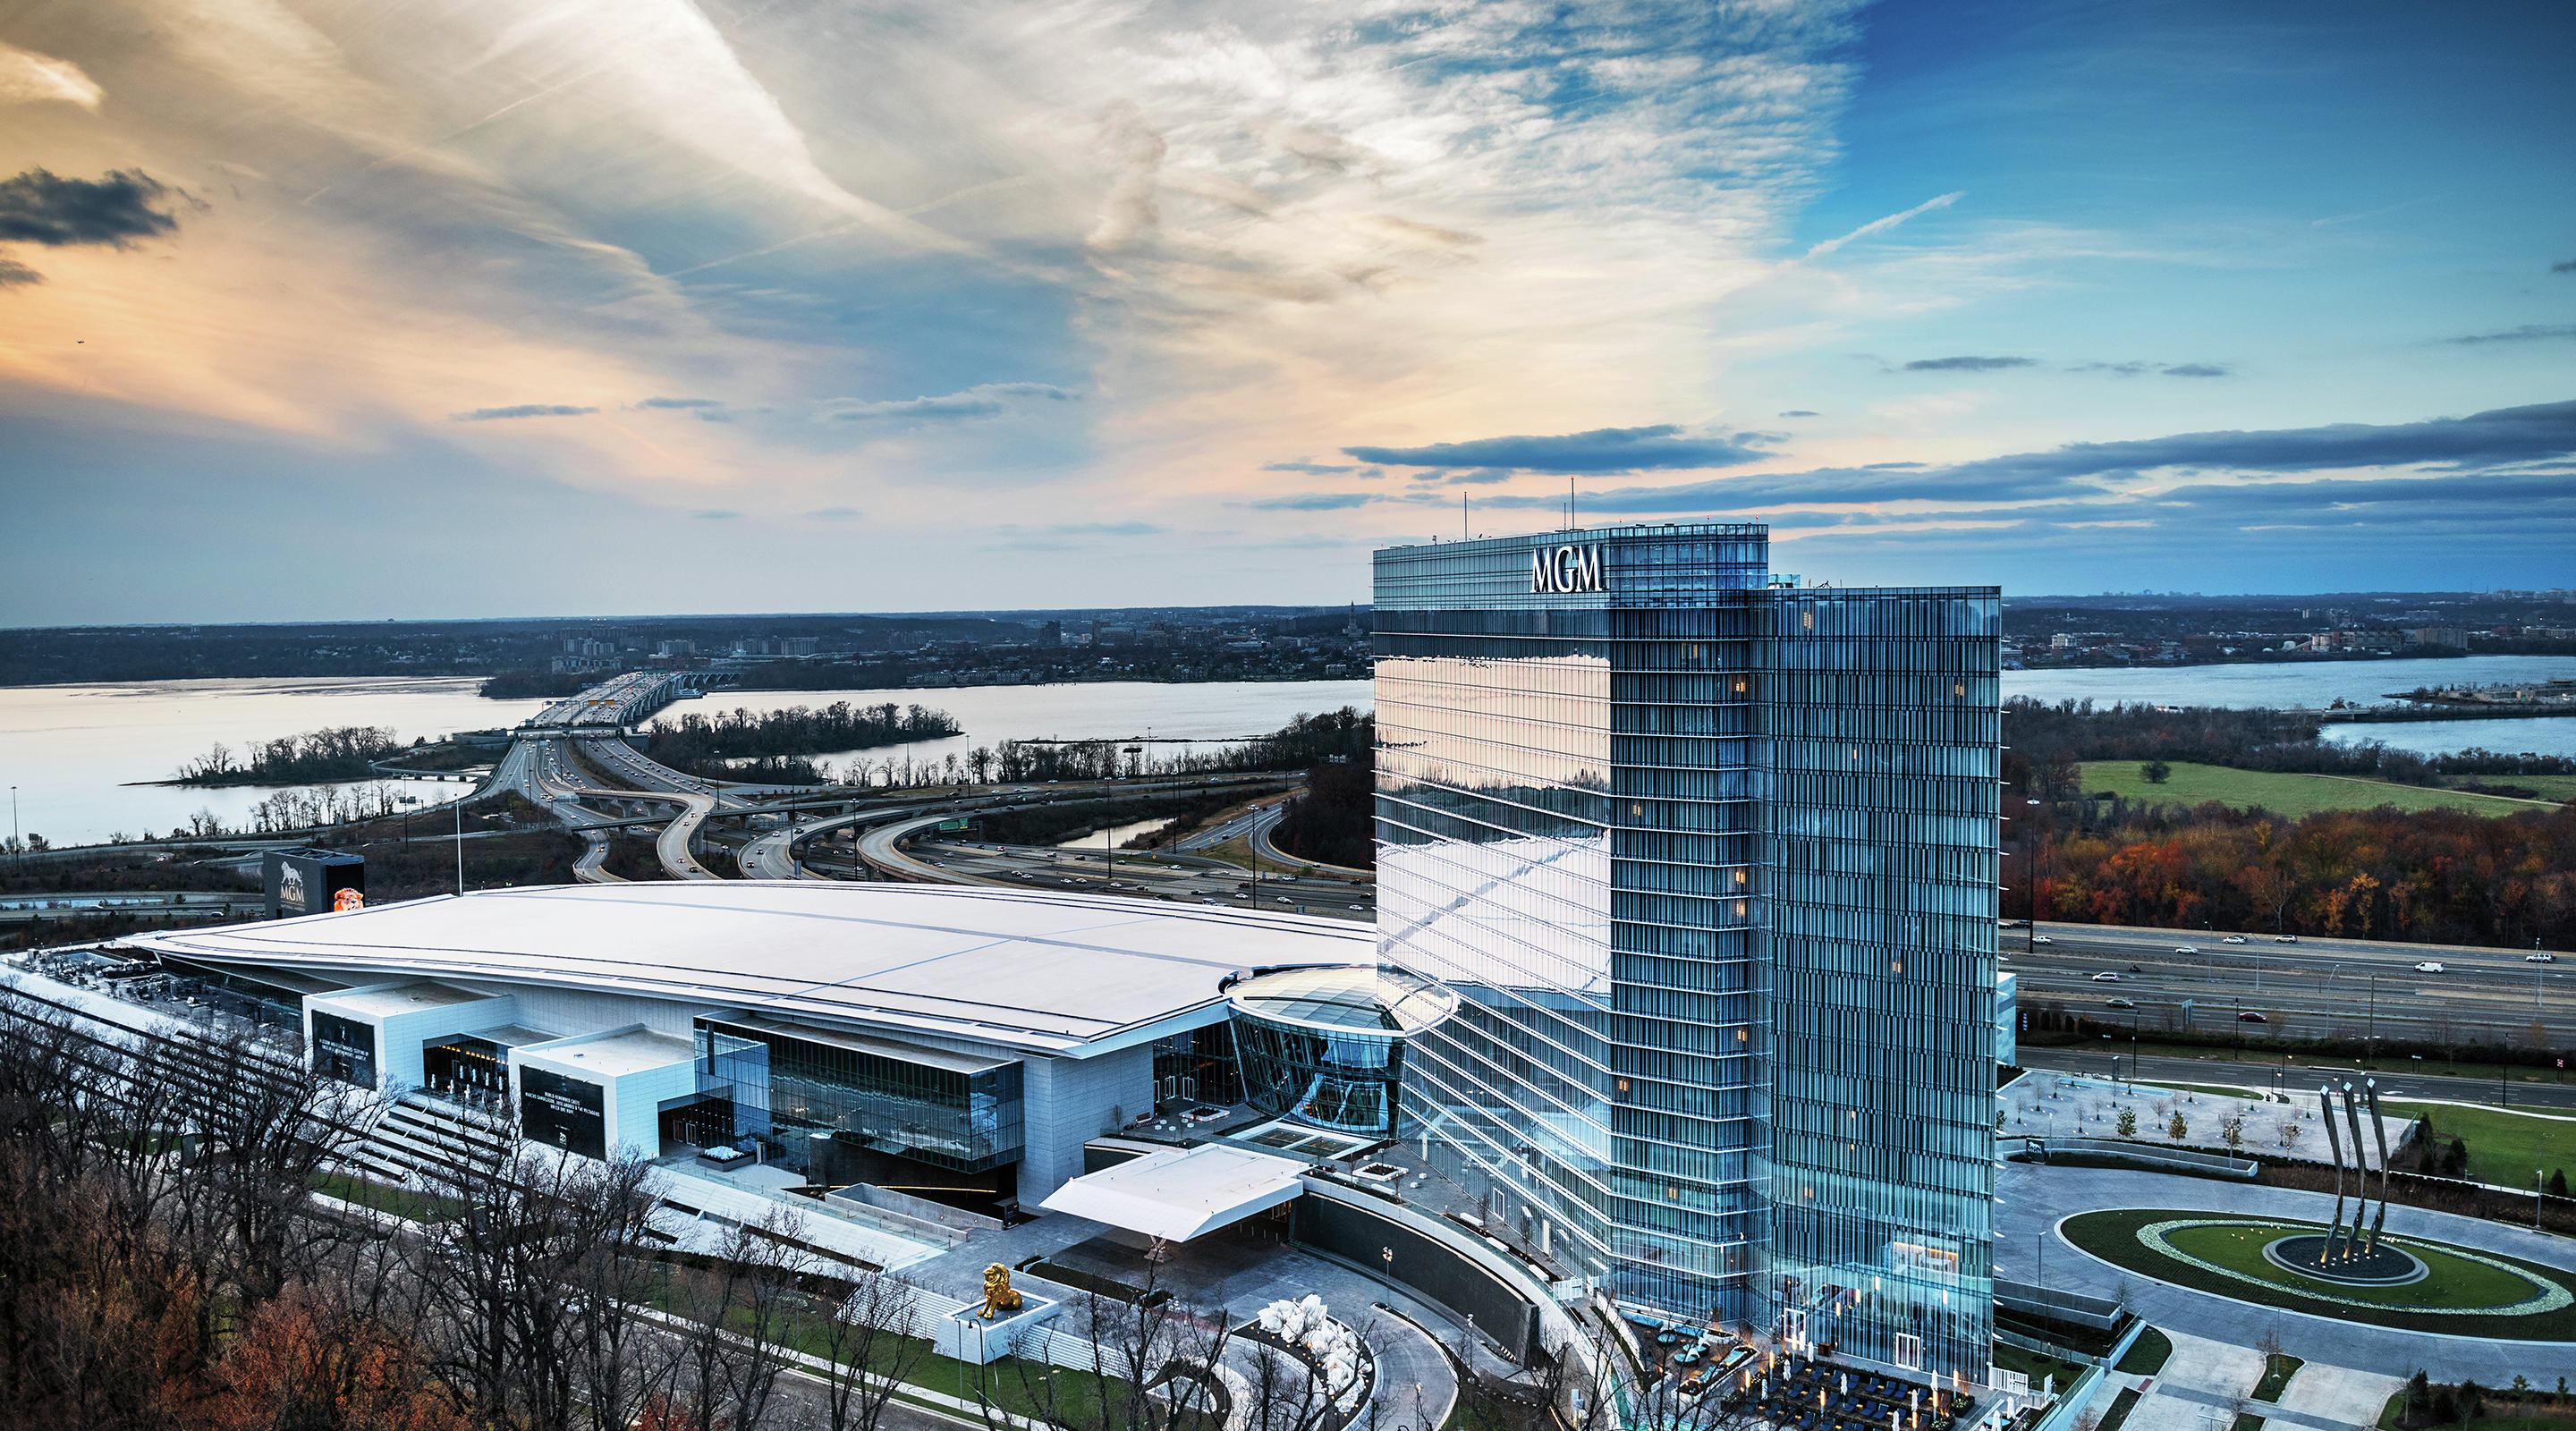 mgm-national-harbor-architecture-aerial-